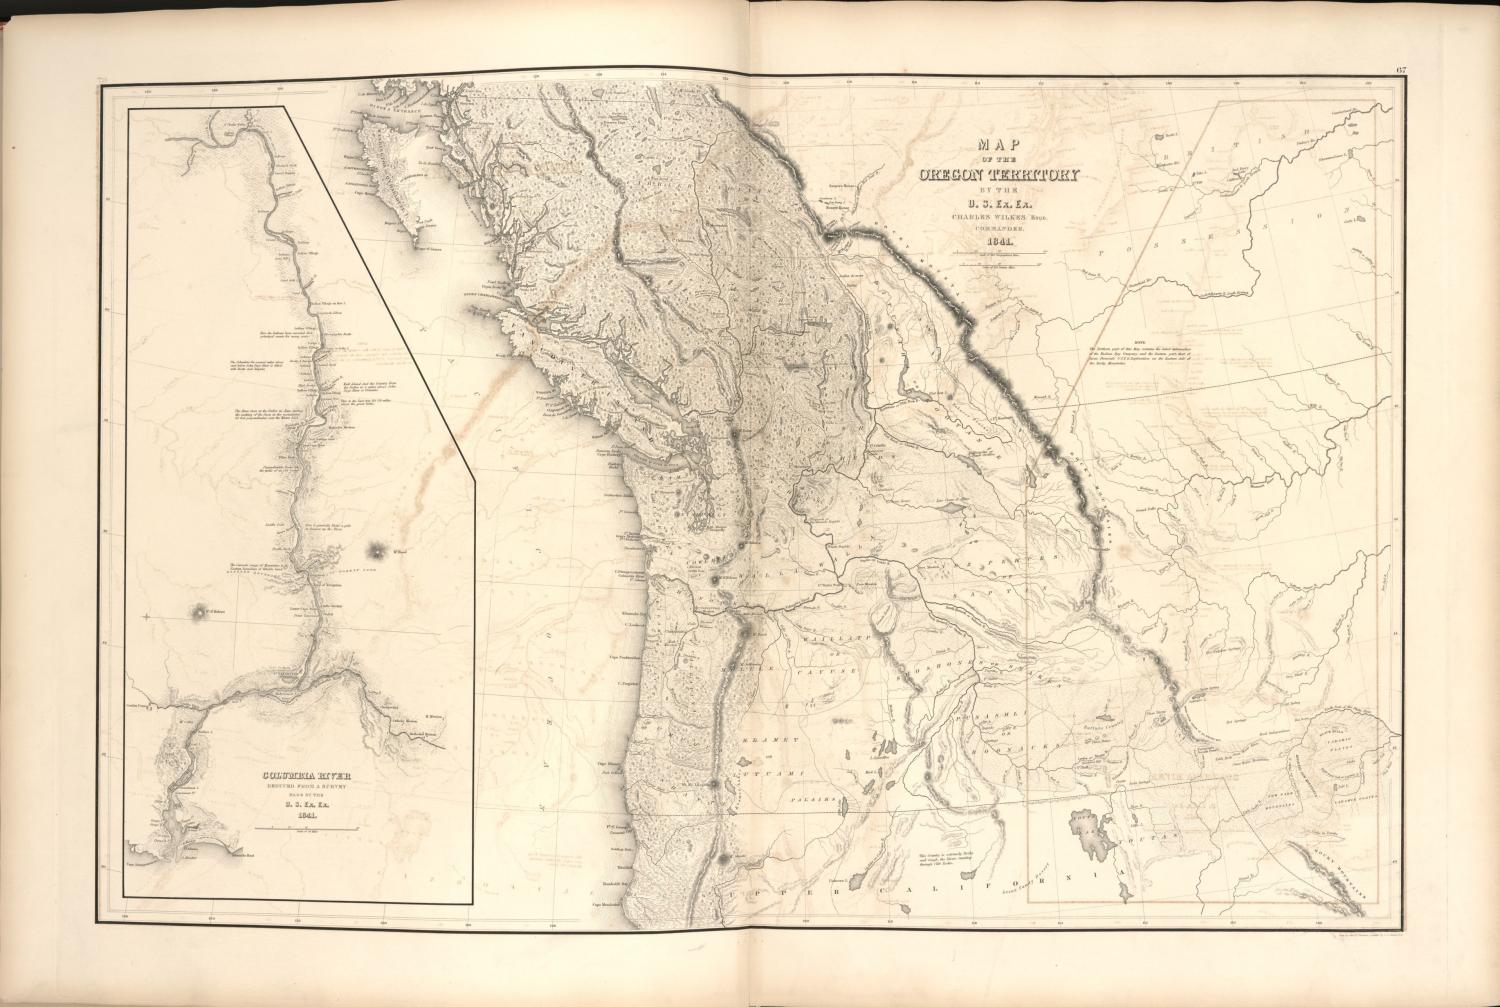 Map of Oregon Territory from 1841